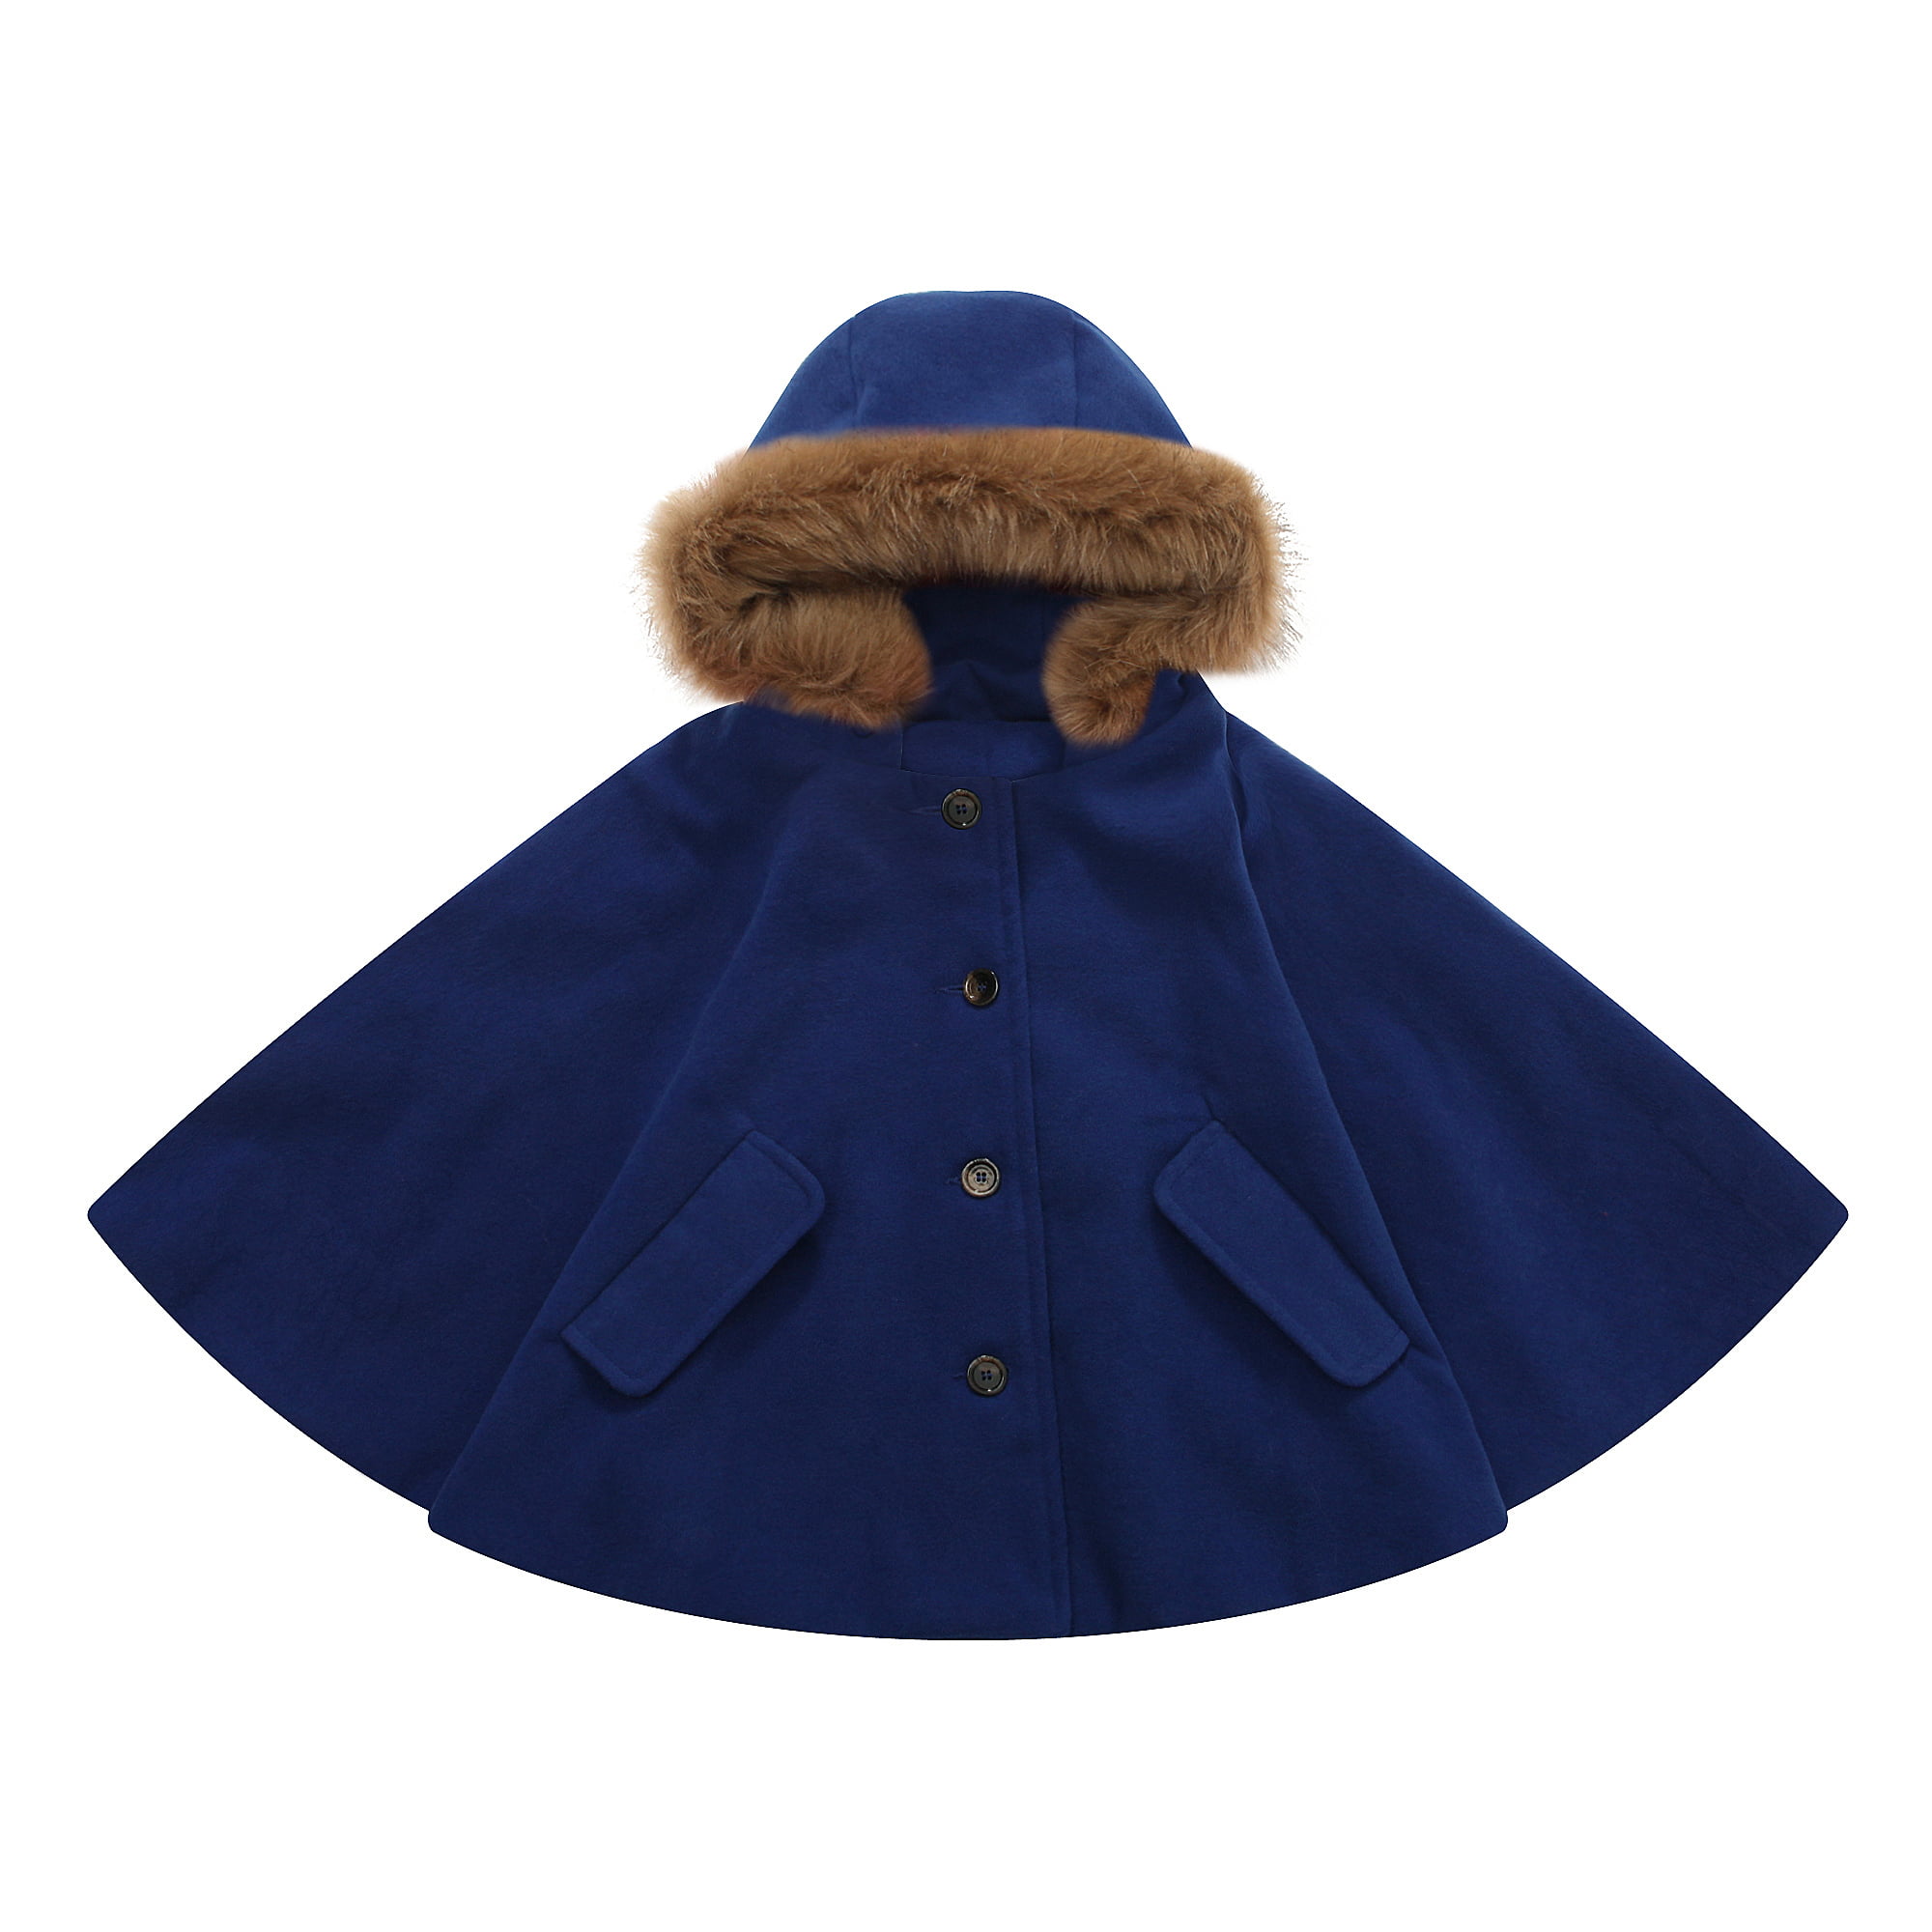 Richie House Girls Fashion Cape with Button Placket RH1116